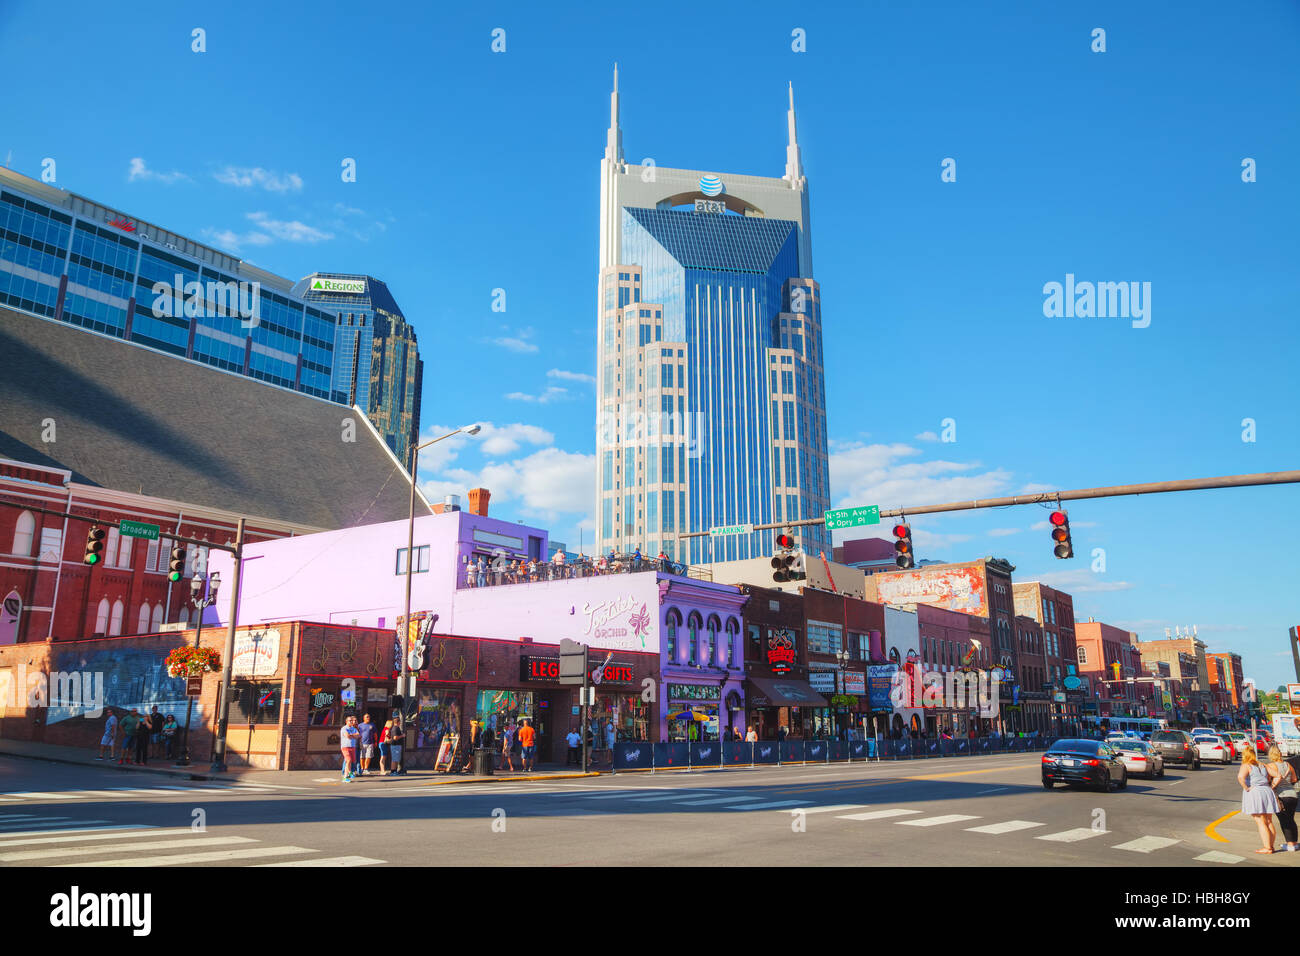 Downtown Nashville with people Stock Photo